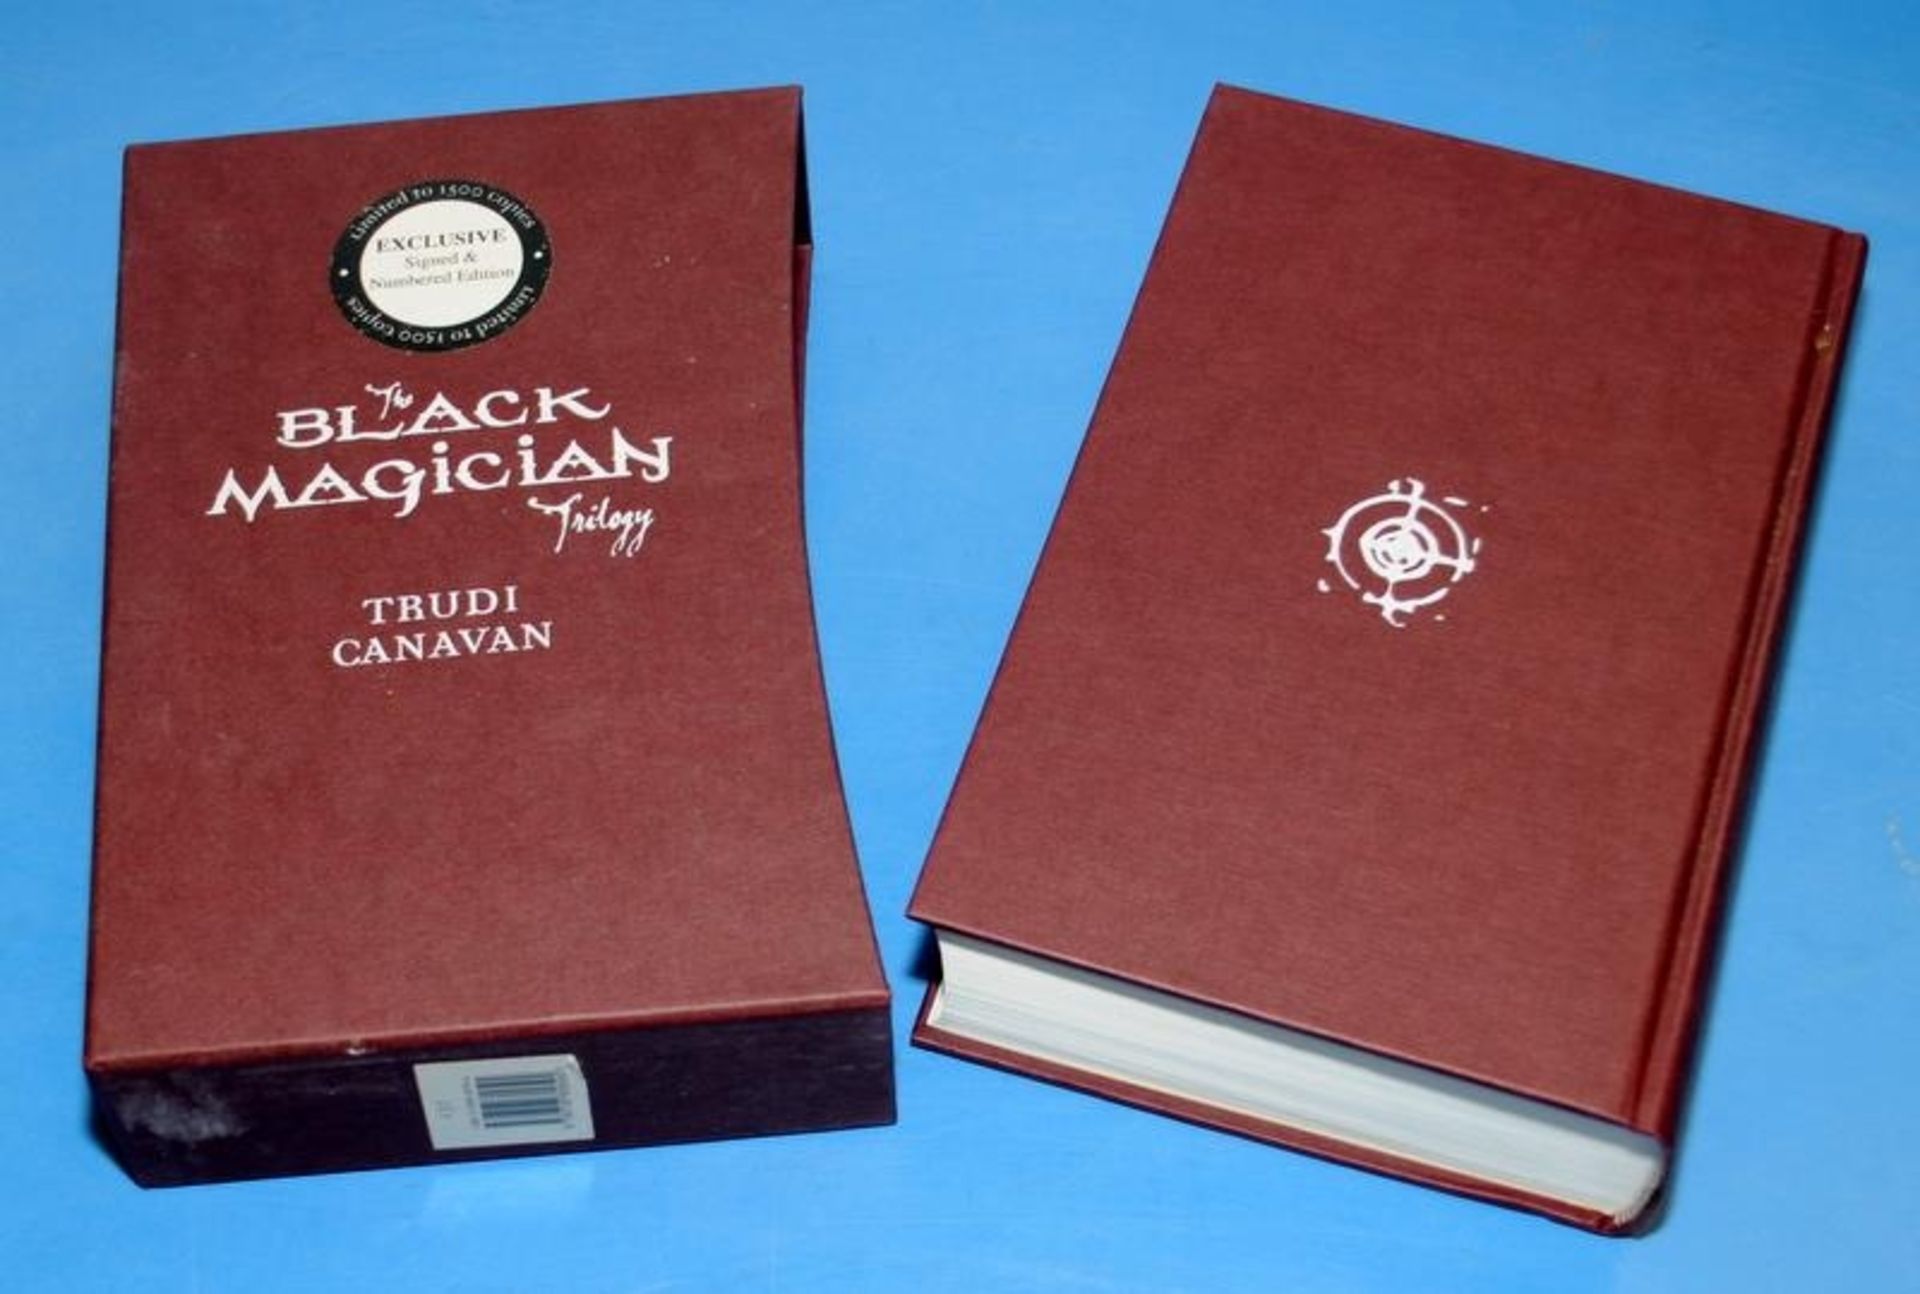 The Black Magician Trilogy by Trudi Canavan hardback book with slipcase. Signed and numbered edition